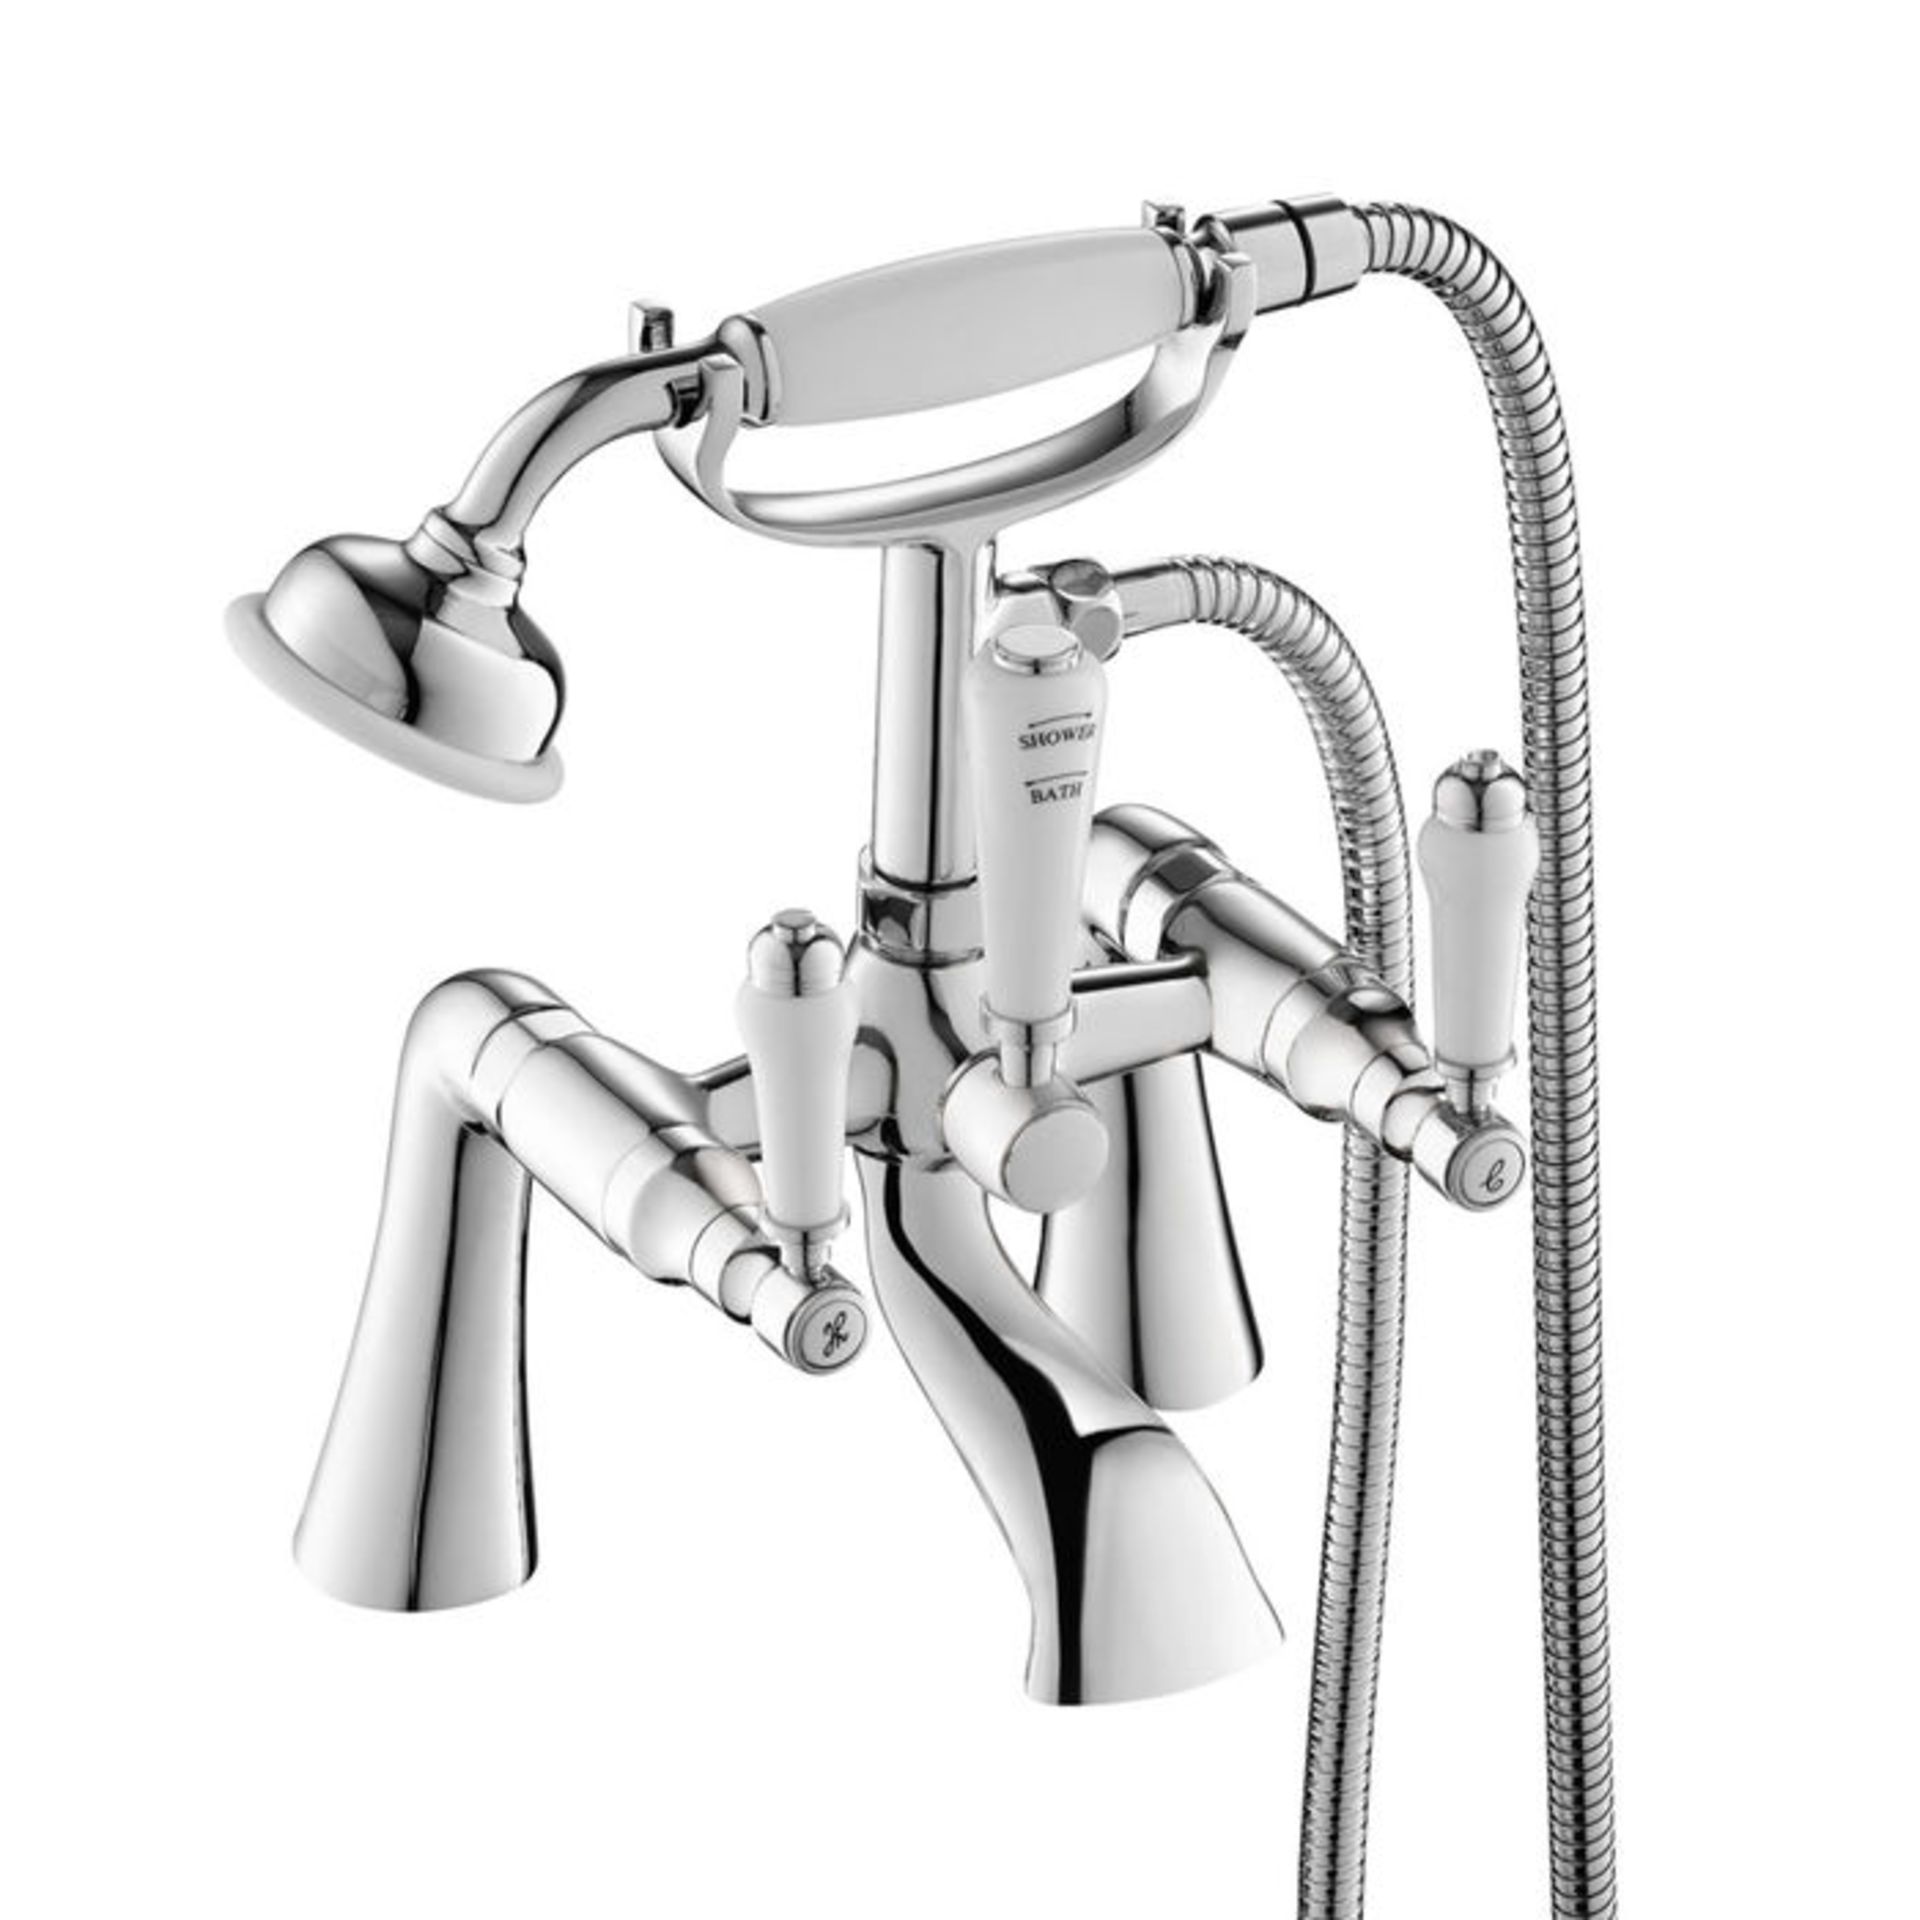 (G29) Regal Chrome Traditional Bath Mixer Lever Tap with Hand Held Shower RRP £179.99 Chrome - Image 6 of 6